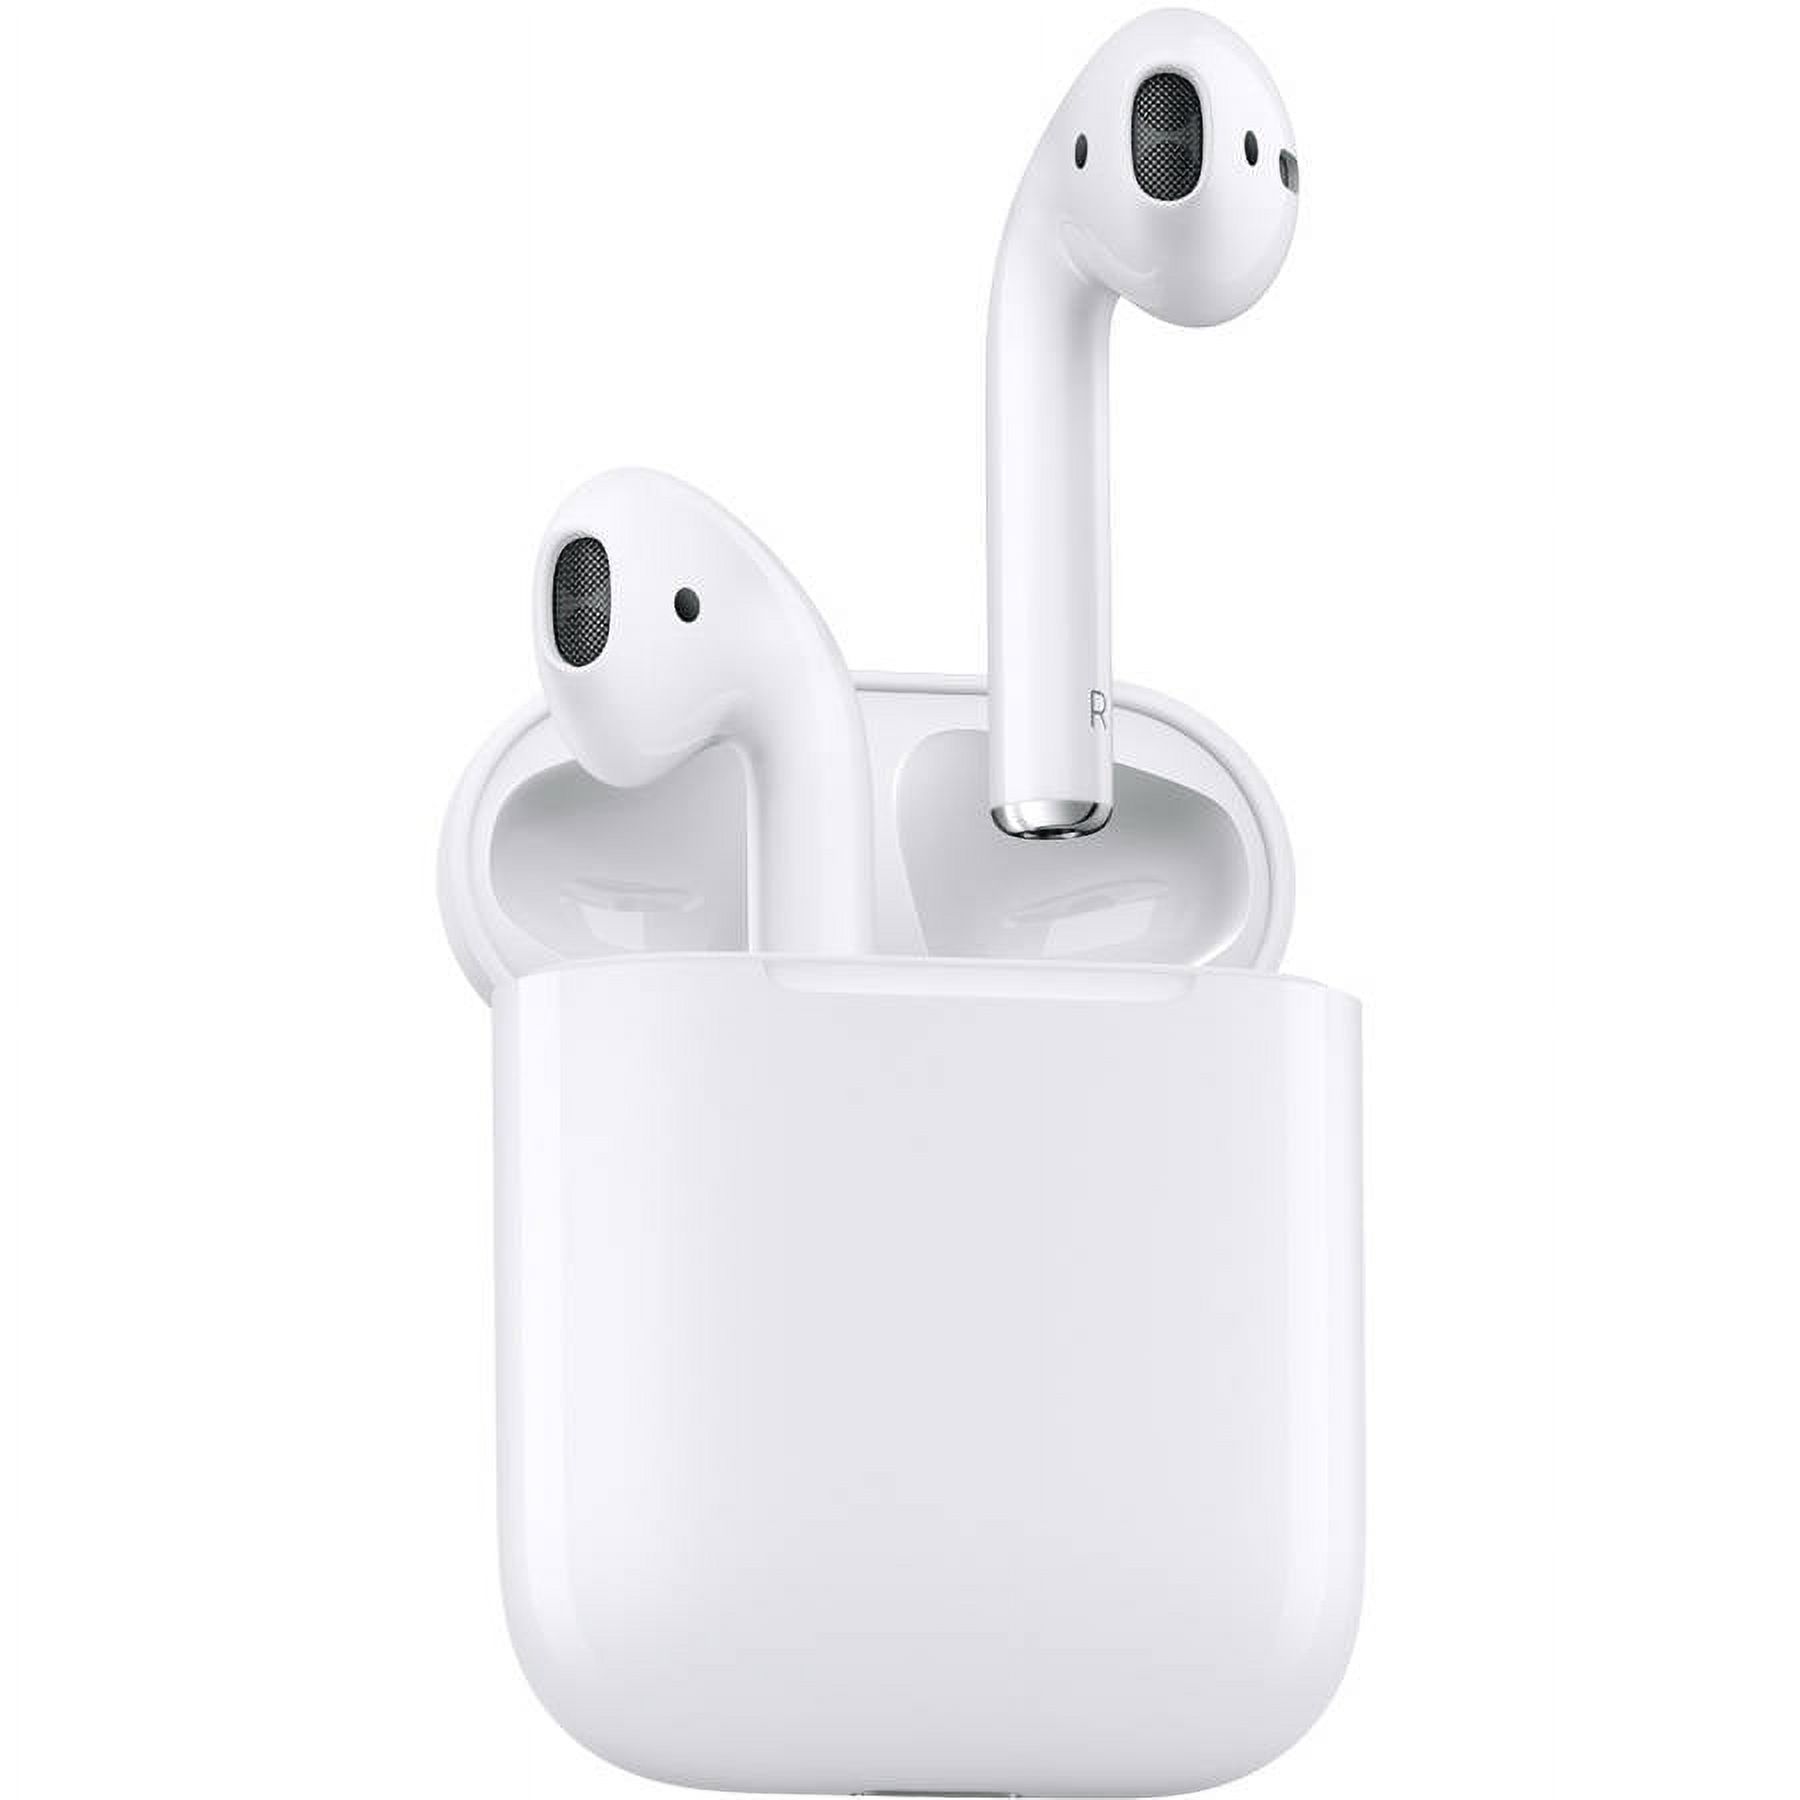 Restored Apple AirPods Bluetooth True Wireless Earbuds with Charging Case, White, VIPRB-MMEF2AM/A (Refurbished) - image 2 of 3